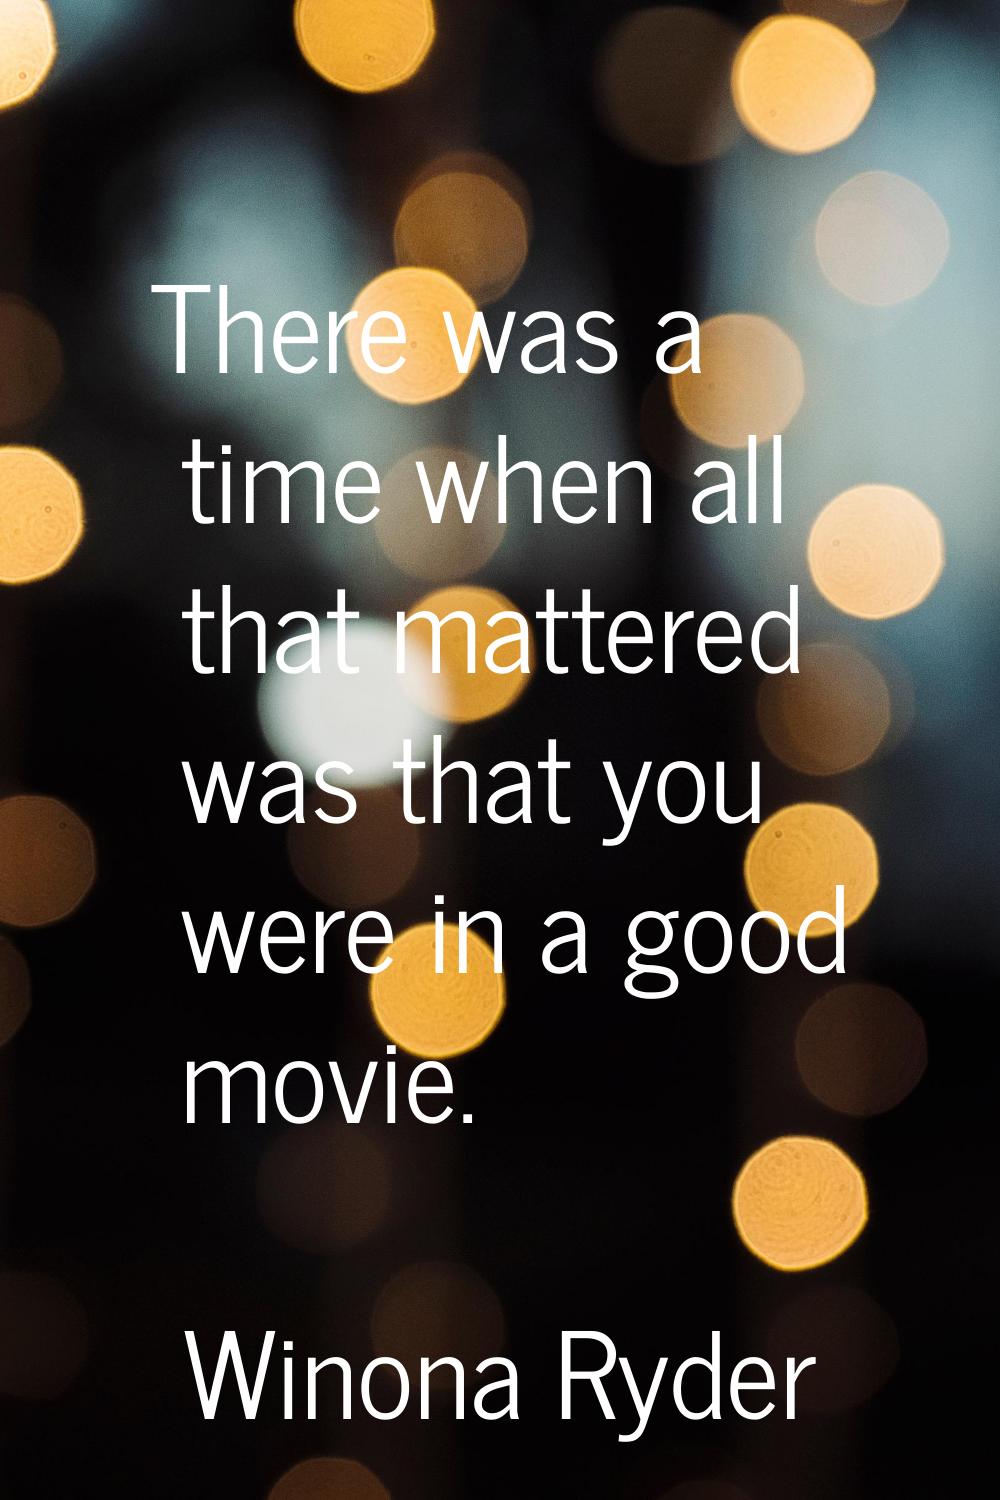 There was a time when all that mattered was that you were in a good movie.